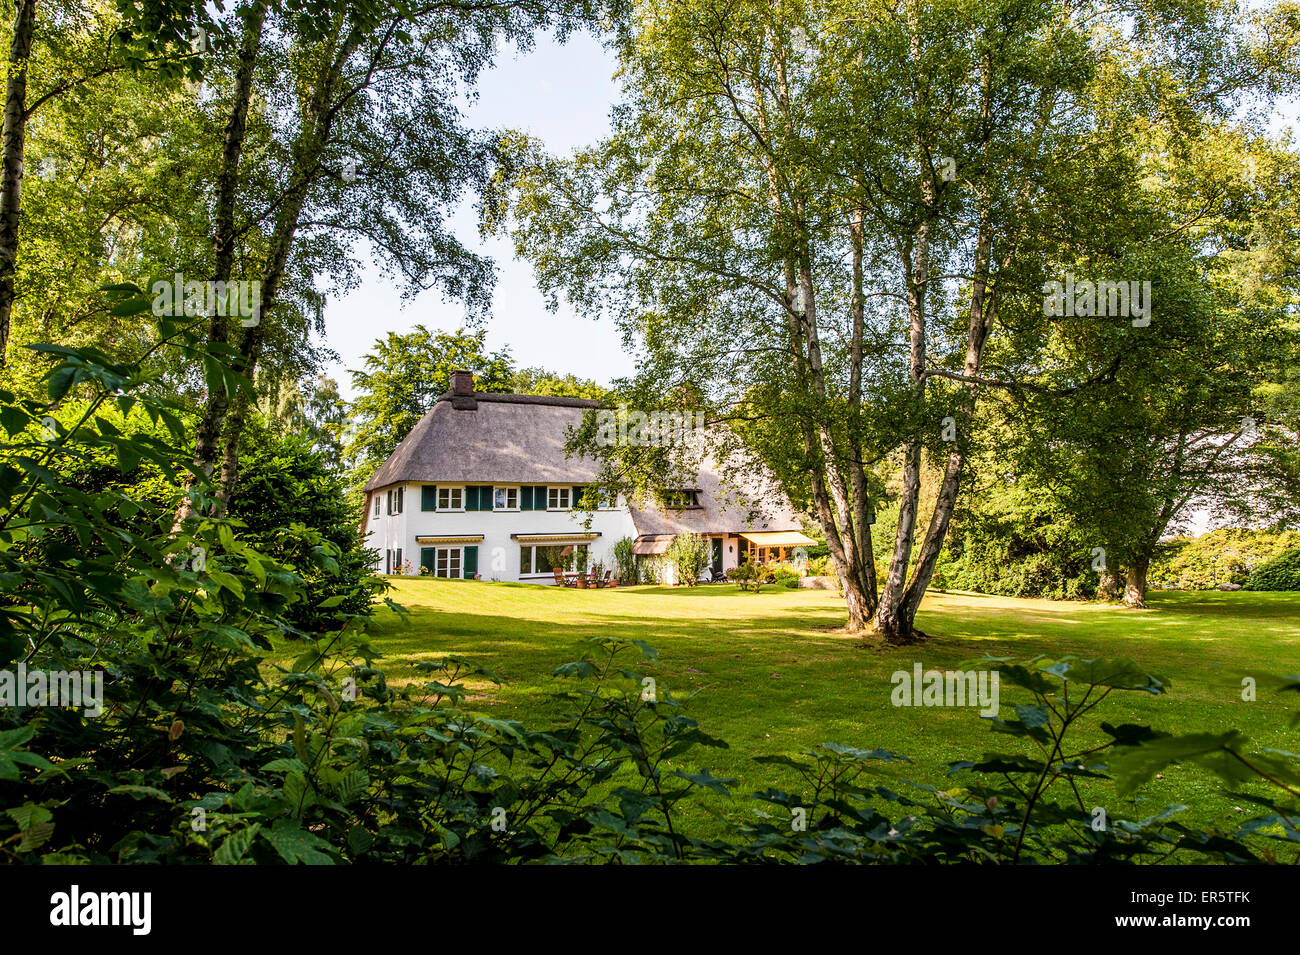 Thatched-roof house between deciduous trees, Hamburg, Germany Stock Photo